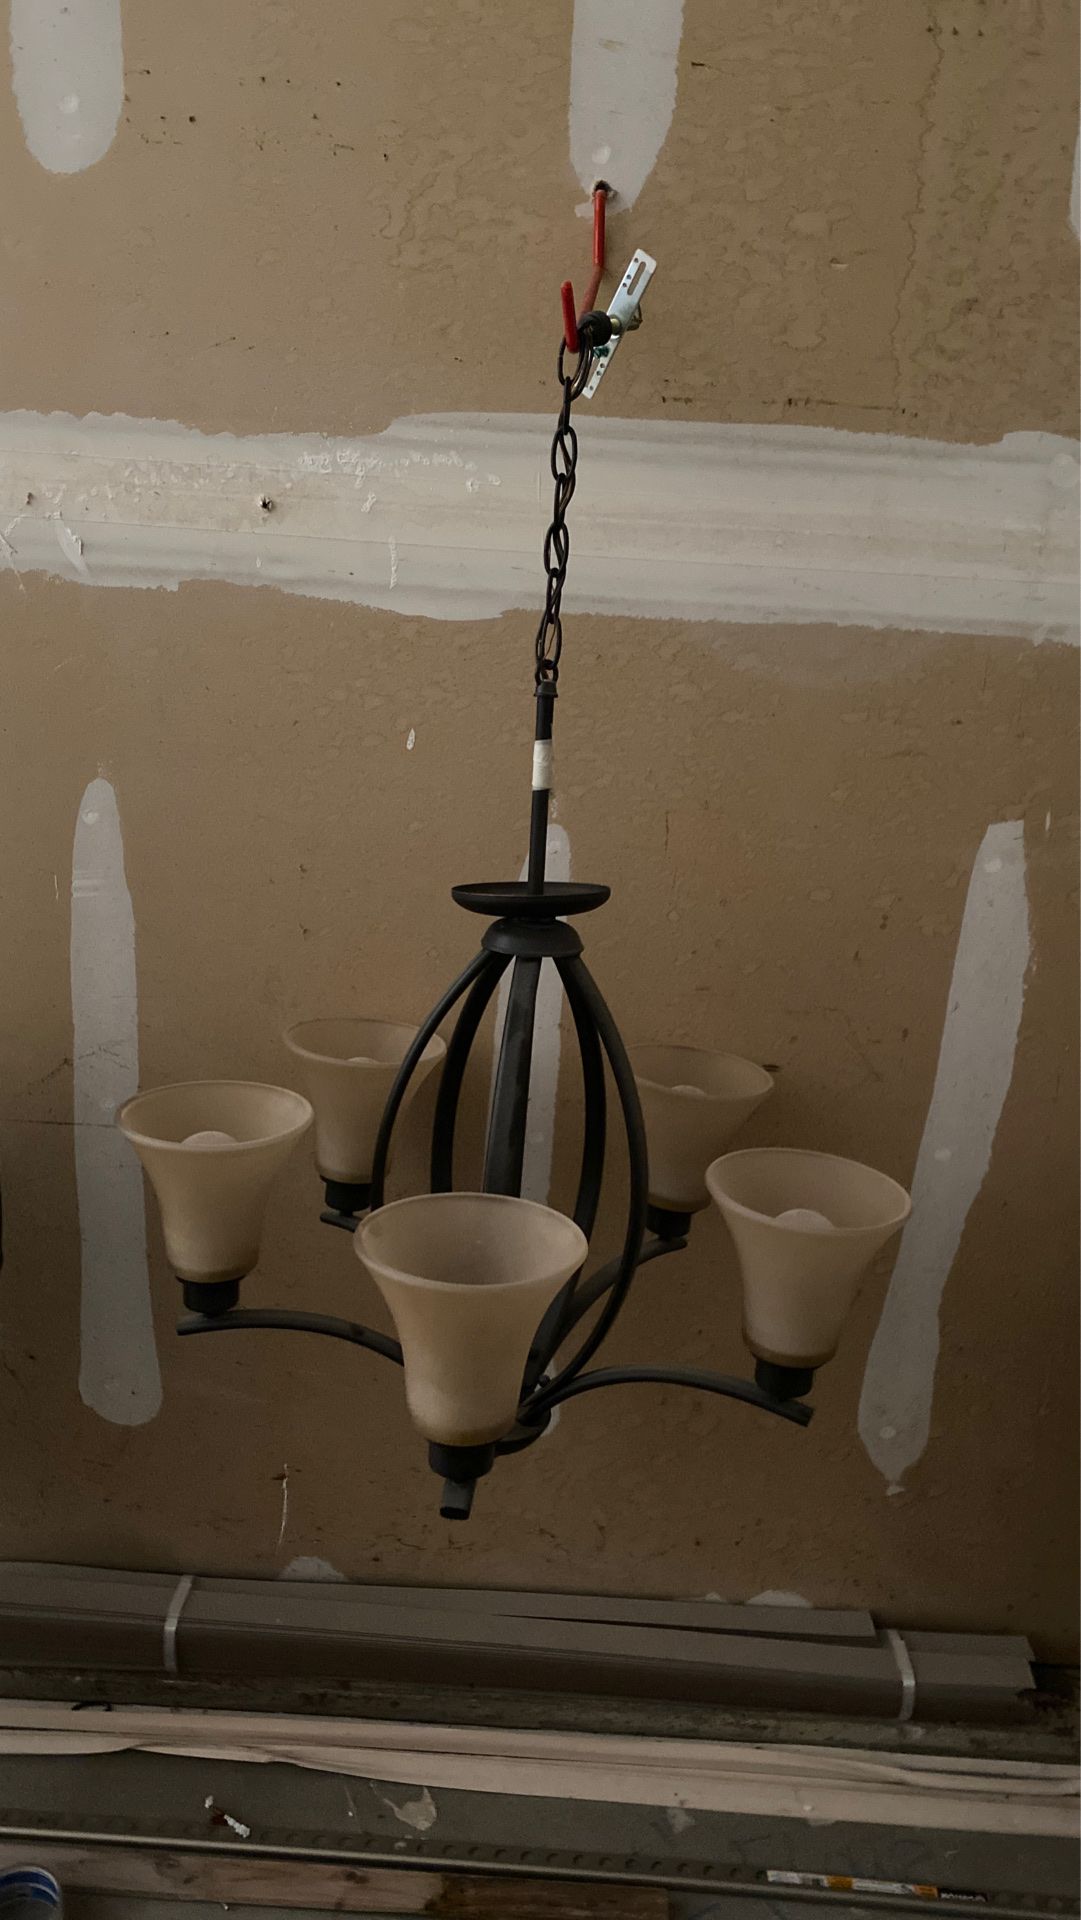 FREE! 5 light Chandelier in Excellent condition